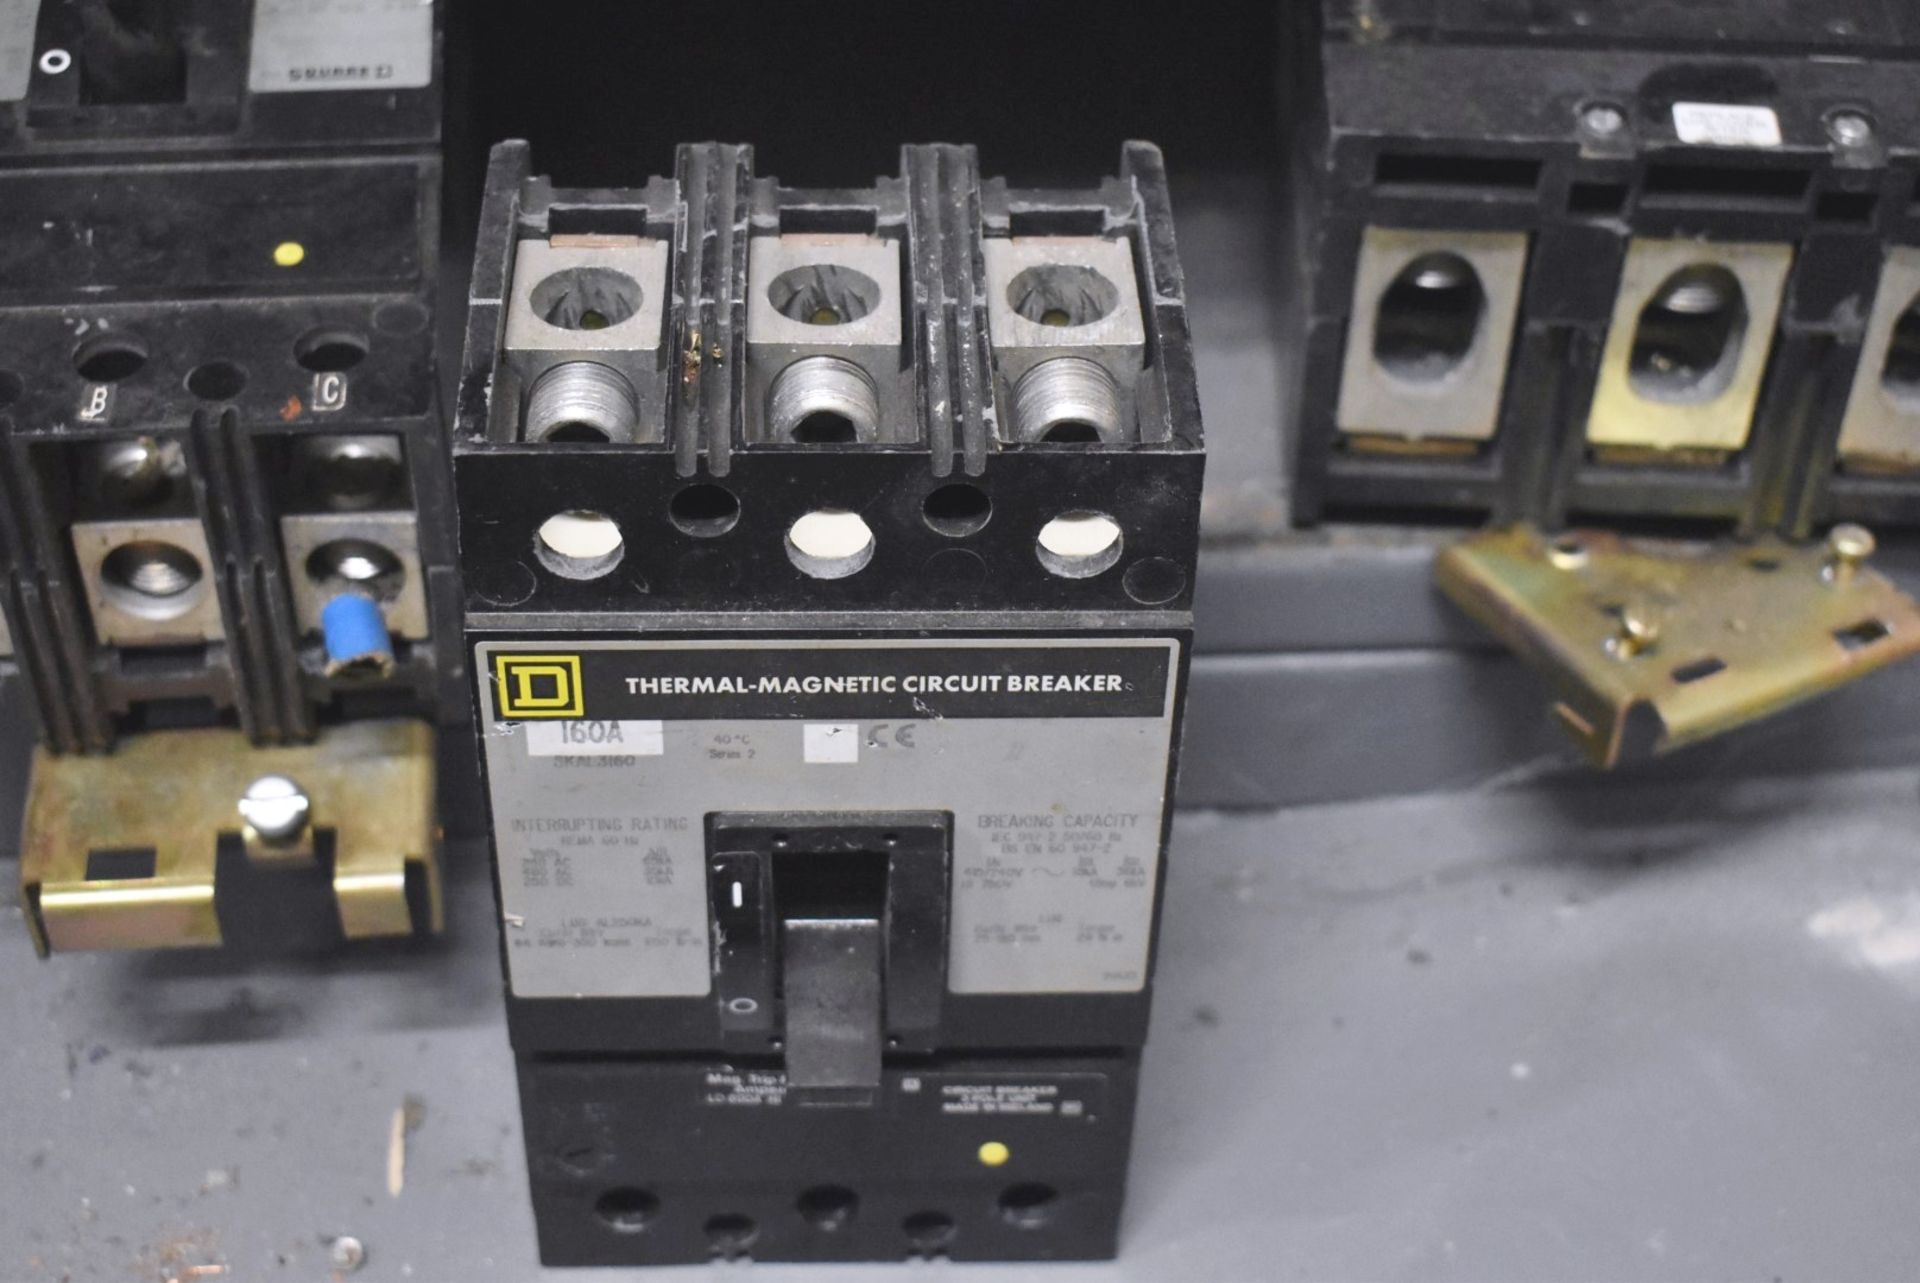 Assorted Electrical Components - Mainly Circuit Breakers - Contents of Shelf - Ref: C668 - CL816 - L - Image 2 of 9